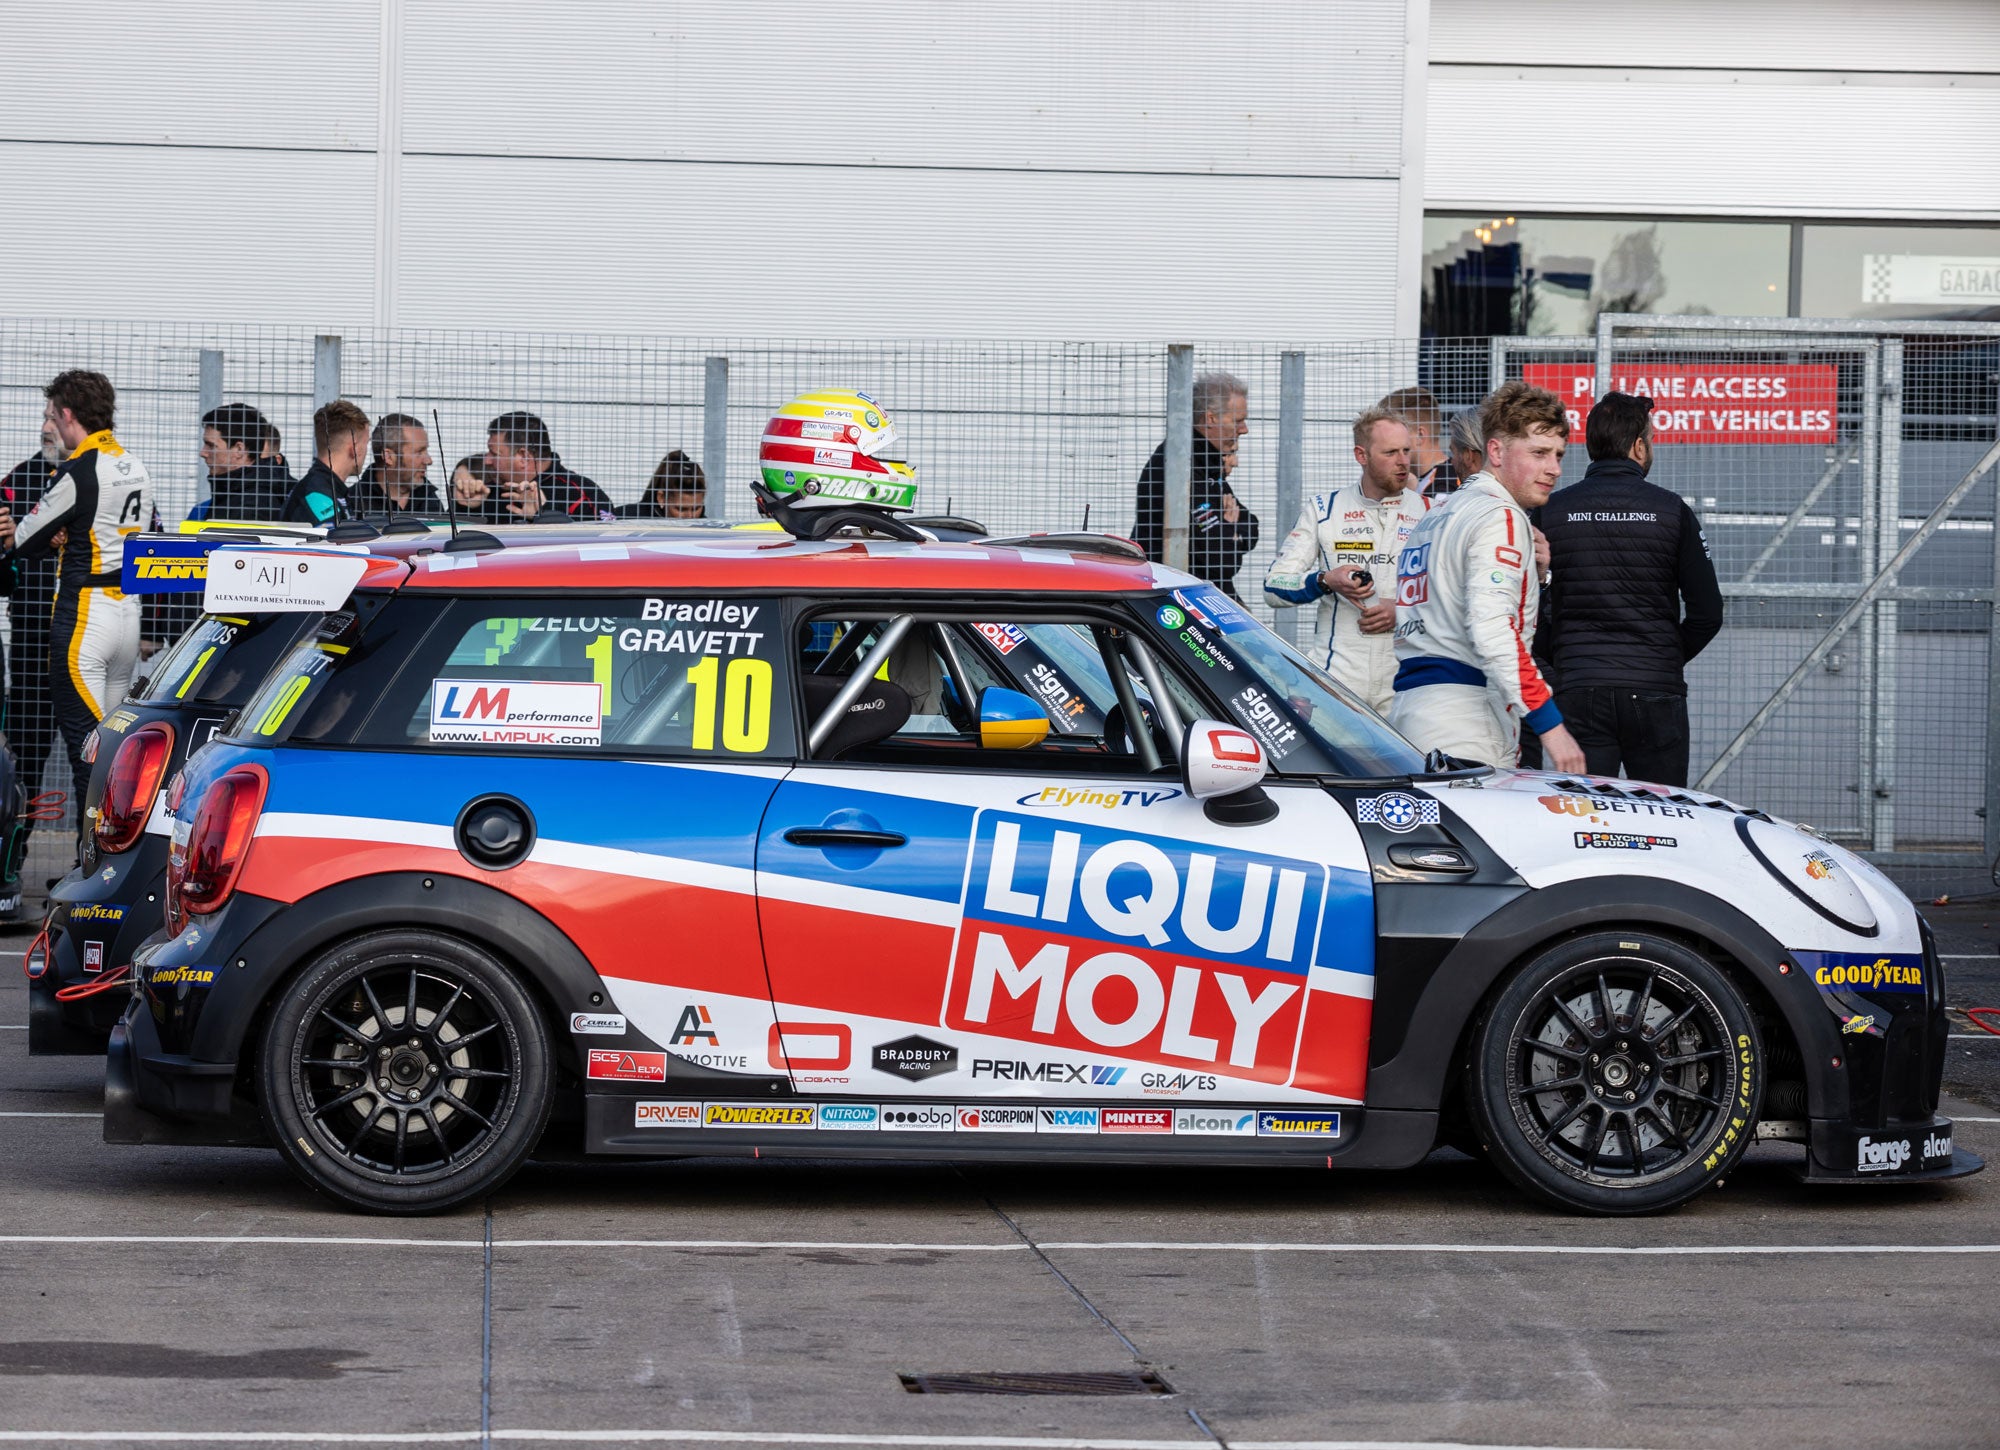 Bradley Gravett son of BTCC British Touring Car Champion Robb Gravett in the MINI Challenge JCW Series at Donington in 2022 Race Car in Parc Ferme after race 3 Graves Motorsport Cooper Racing Driver LIQUI MOLY LM Performance Thinking it Better